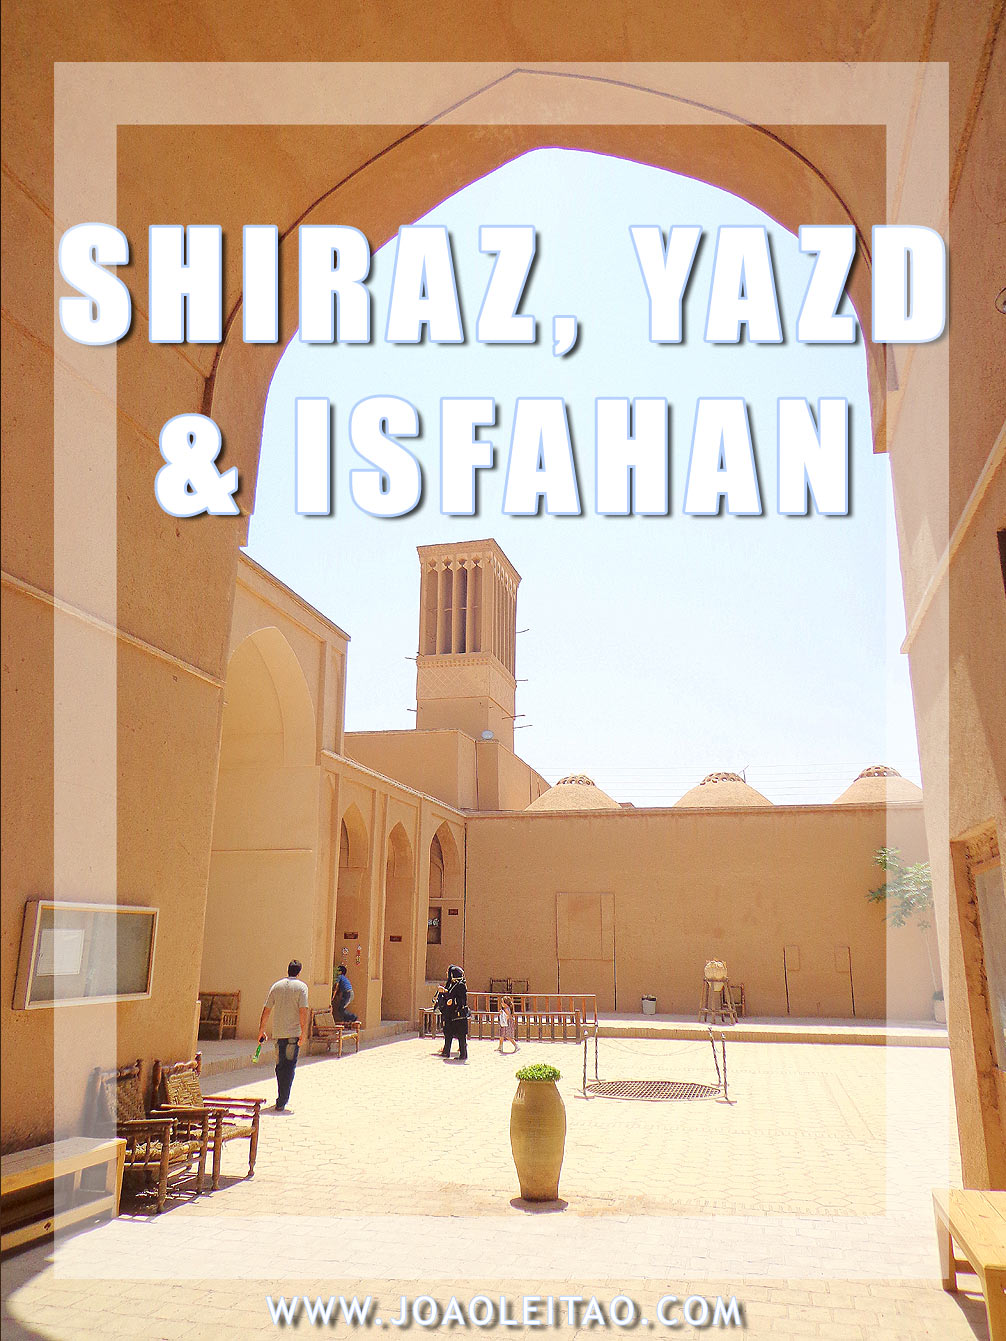 One-week in Shiraz, Yazd & Isfahan - Iran: Top Attractions & Things To Do